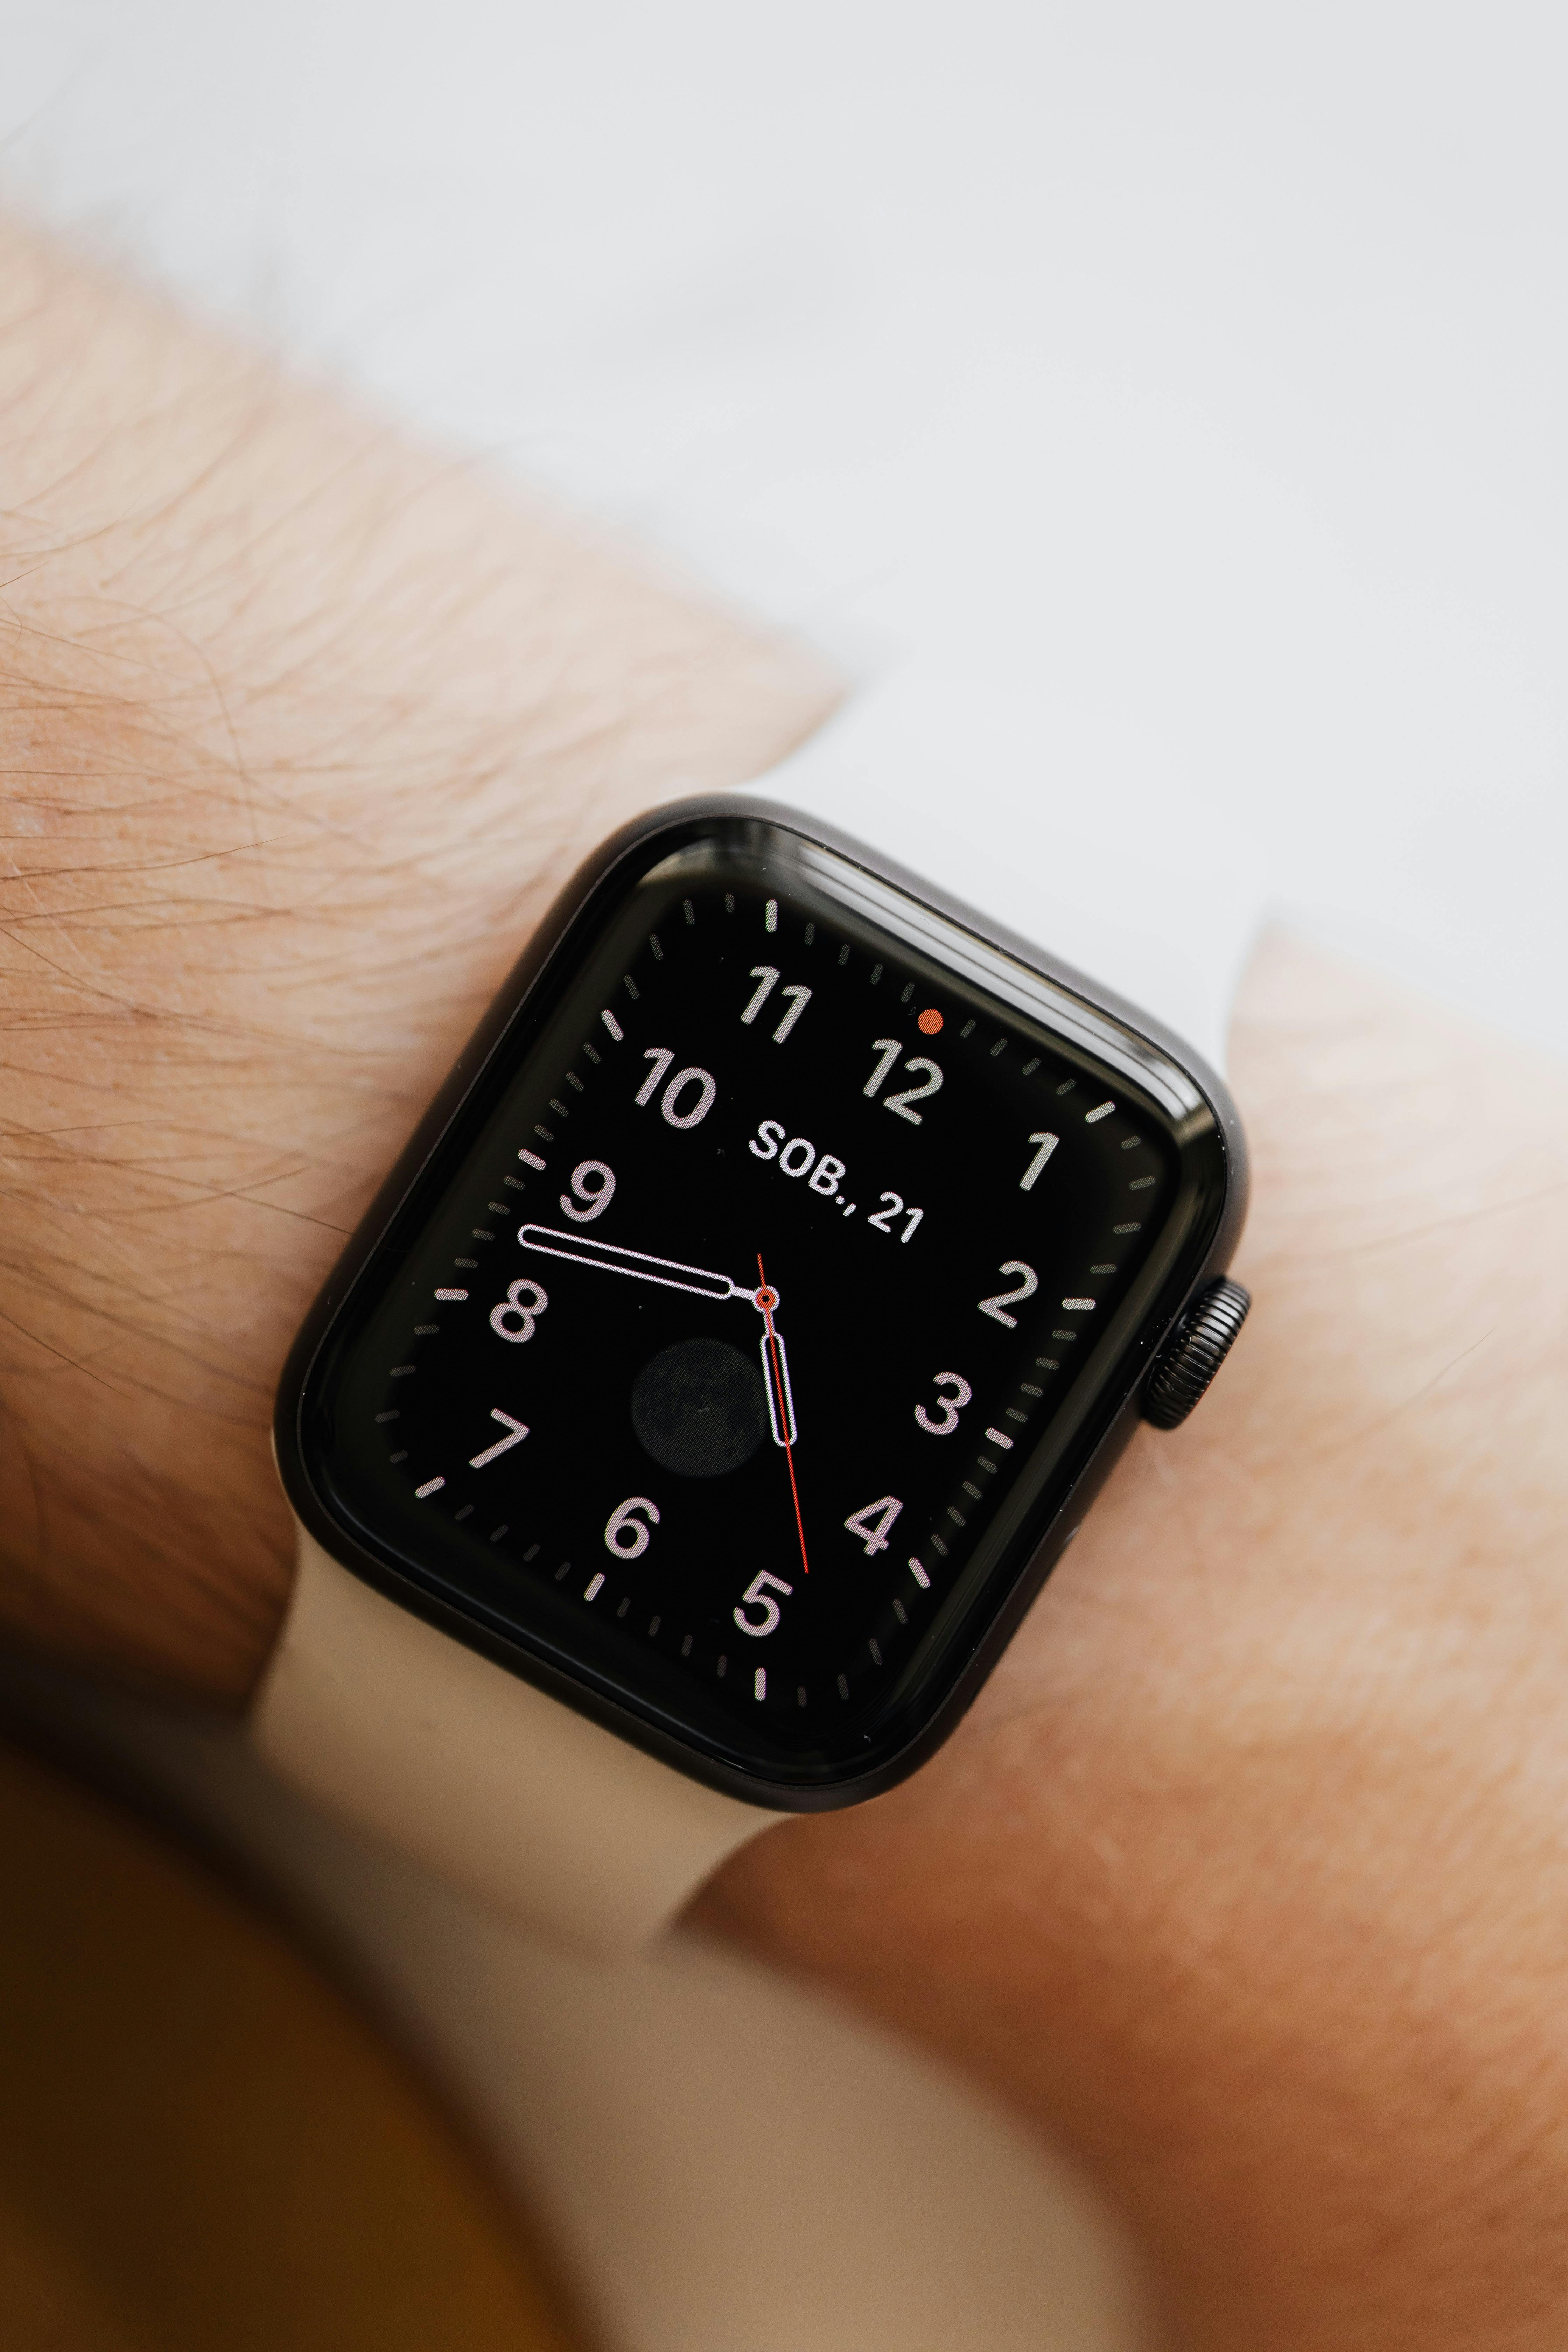 HQ Smart Watch Pictures  Download Free Images on Unsplash